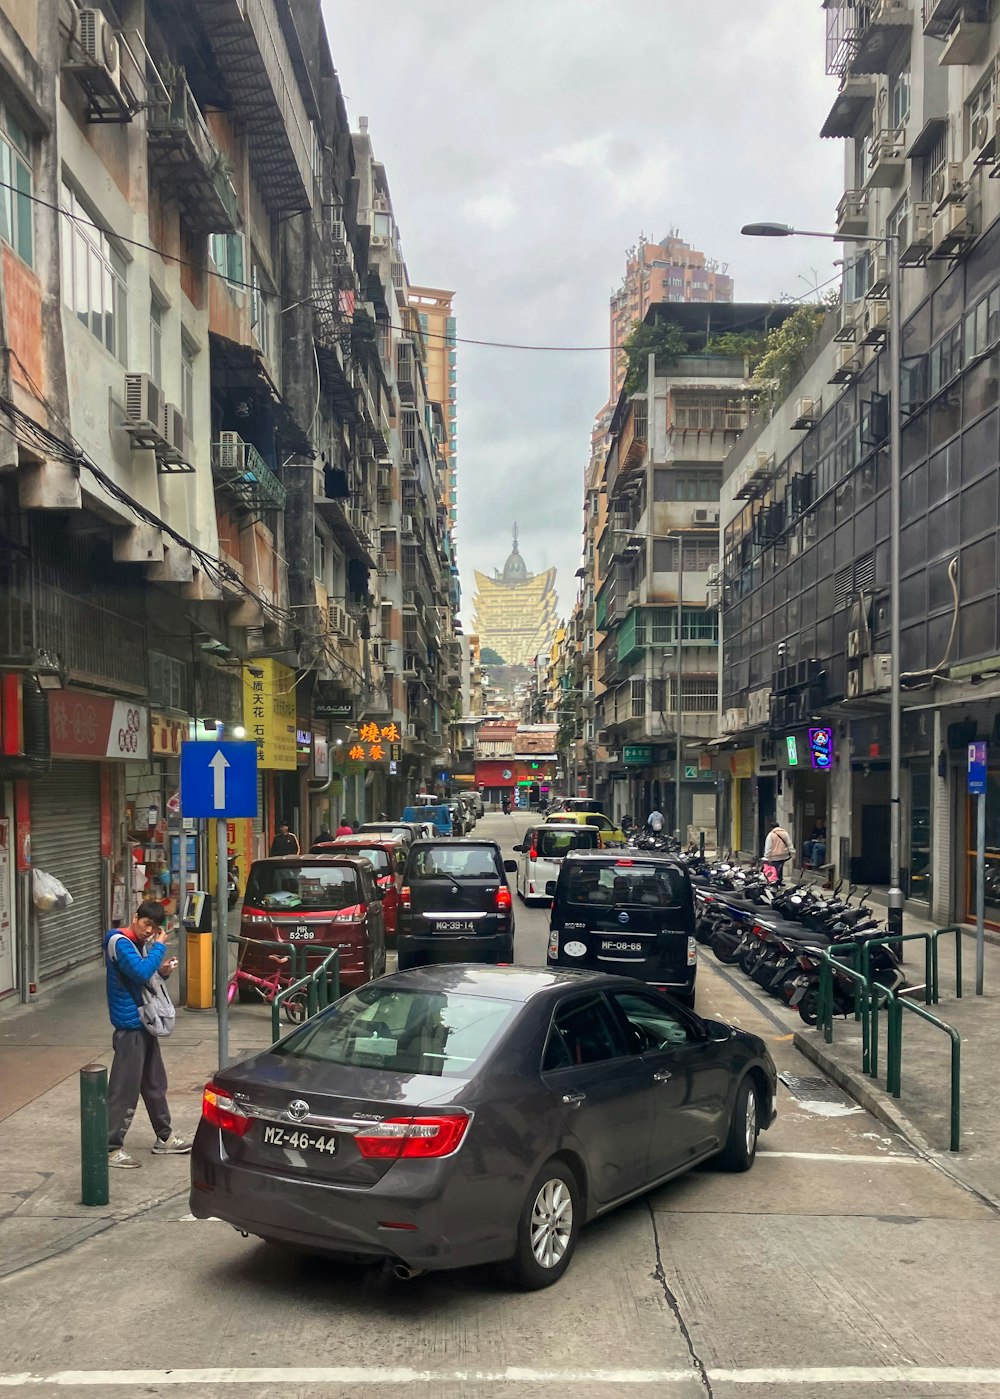 a city street filled with lots of parked cars